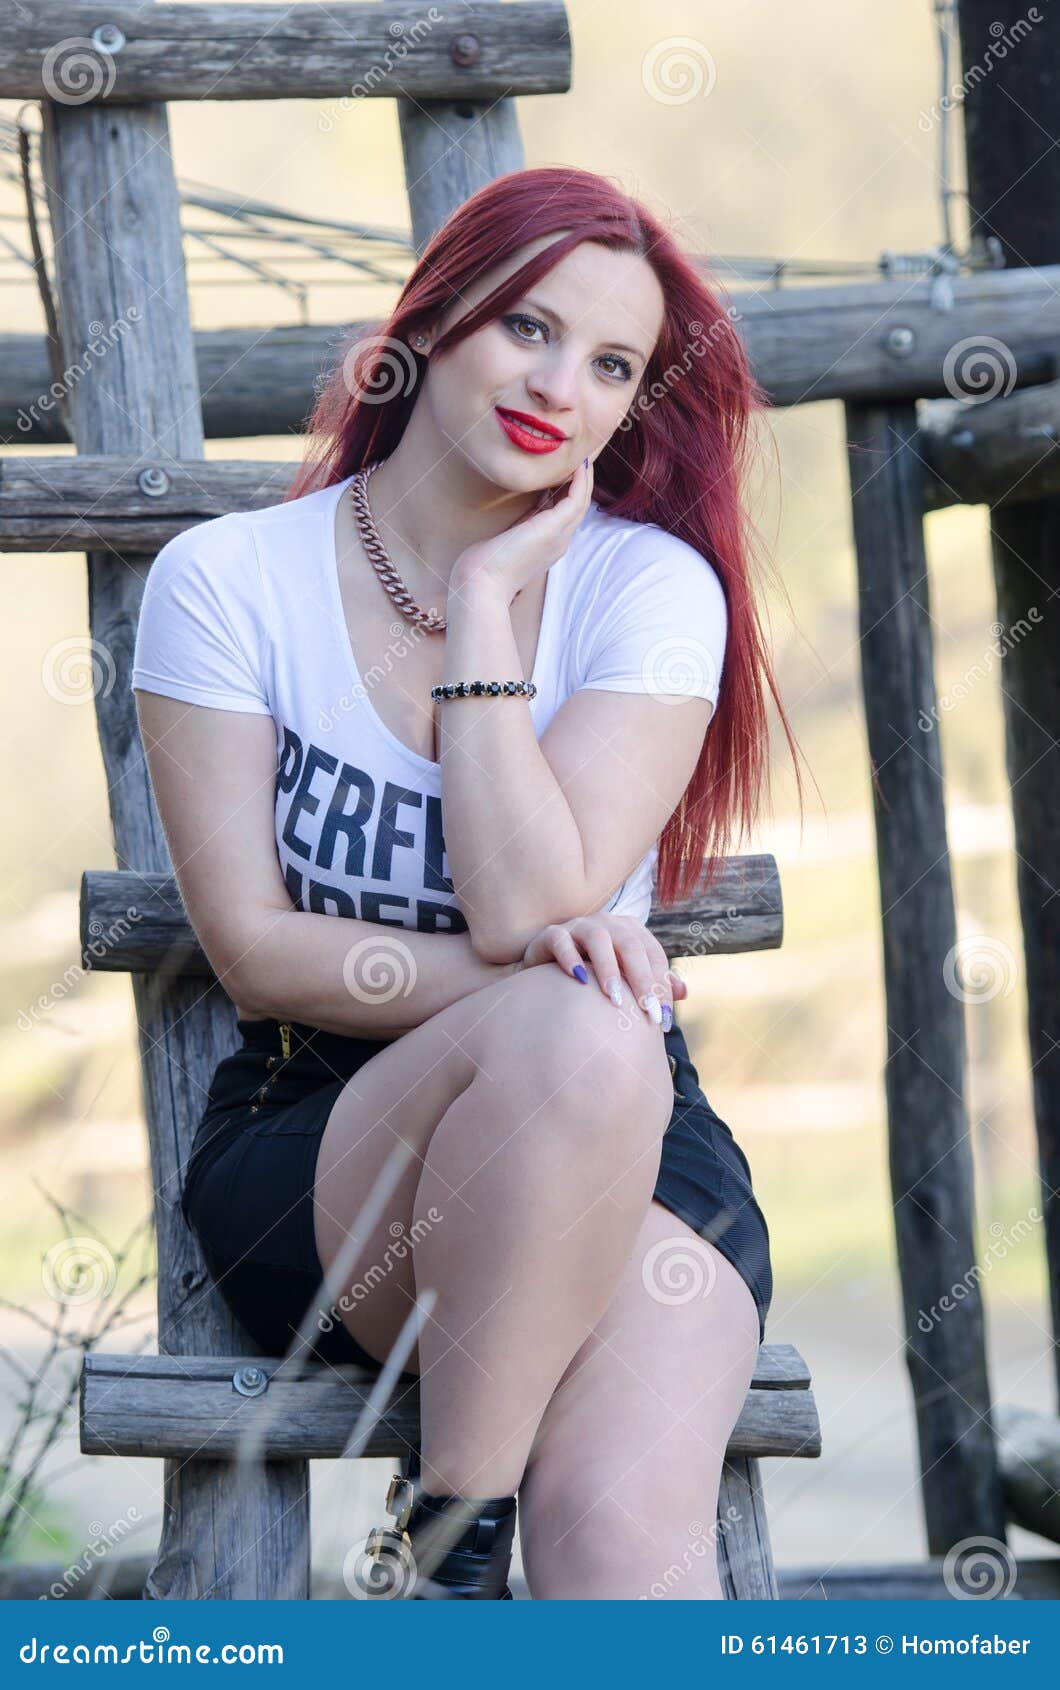 sweet red hair chick